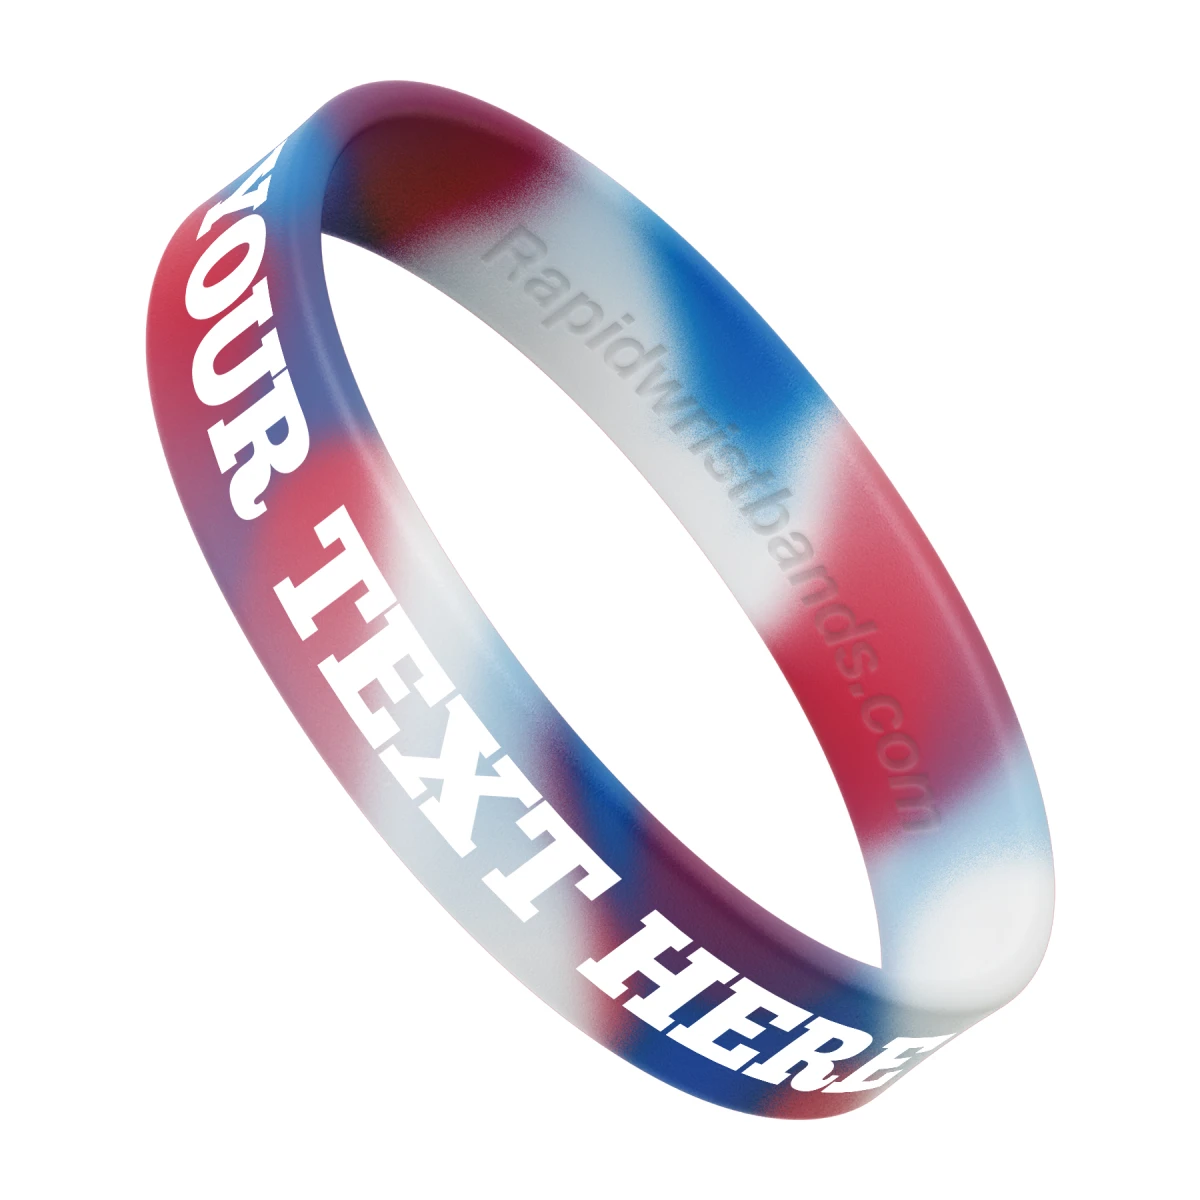 Swirl Red/White/Blue Wristband With Your Text Here Printed In White